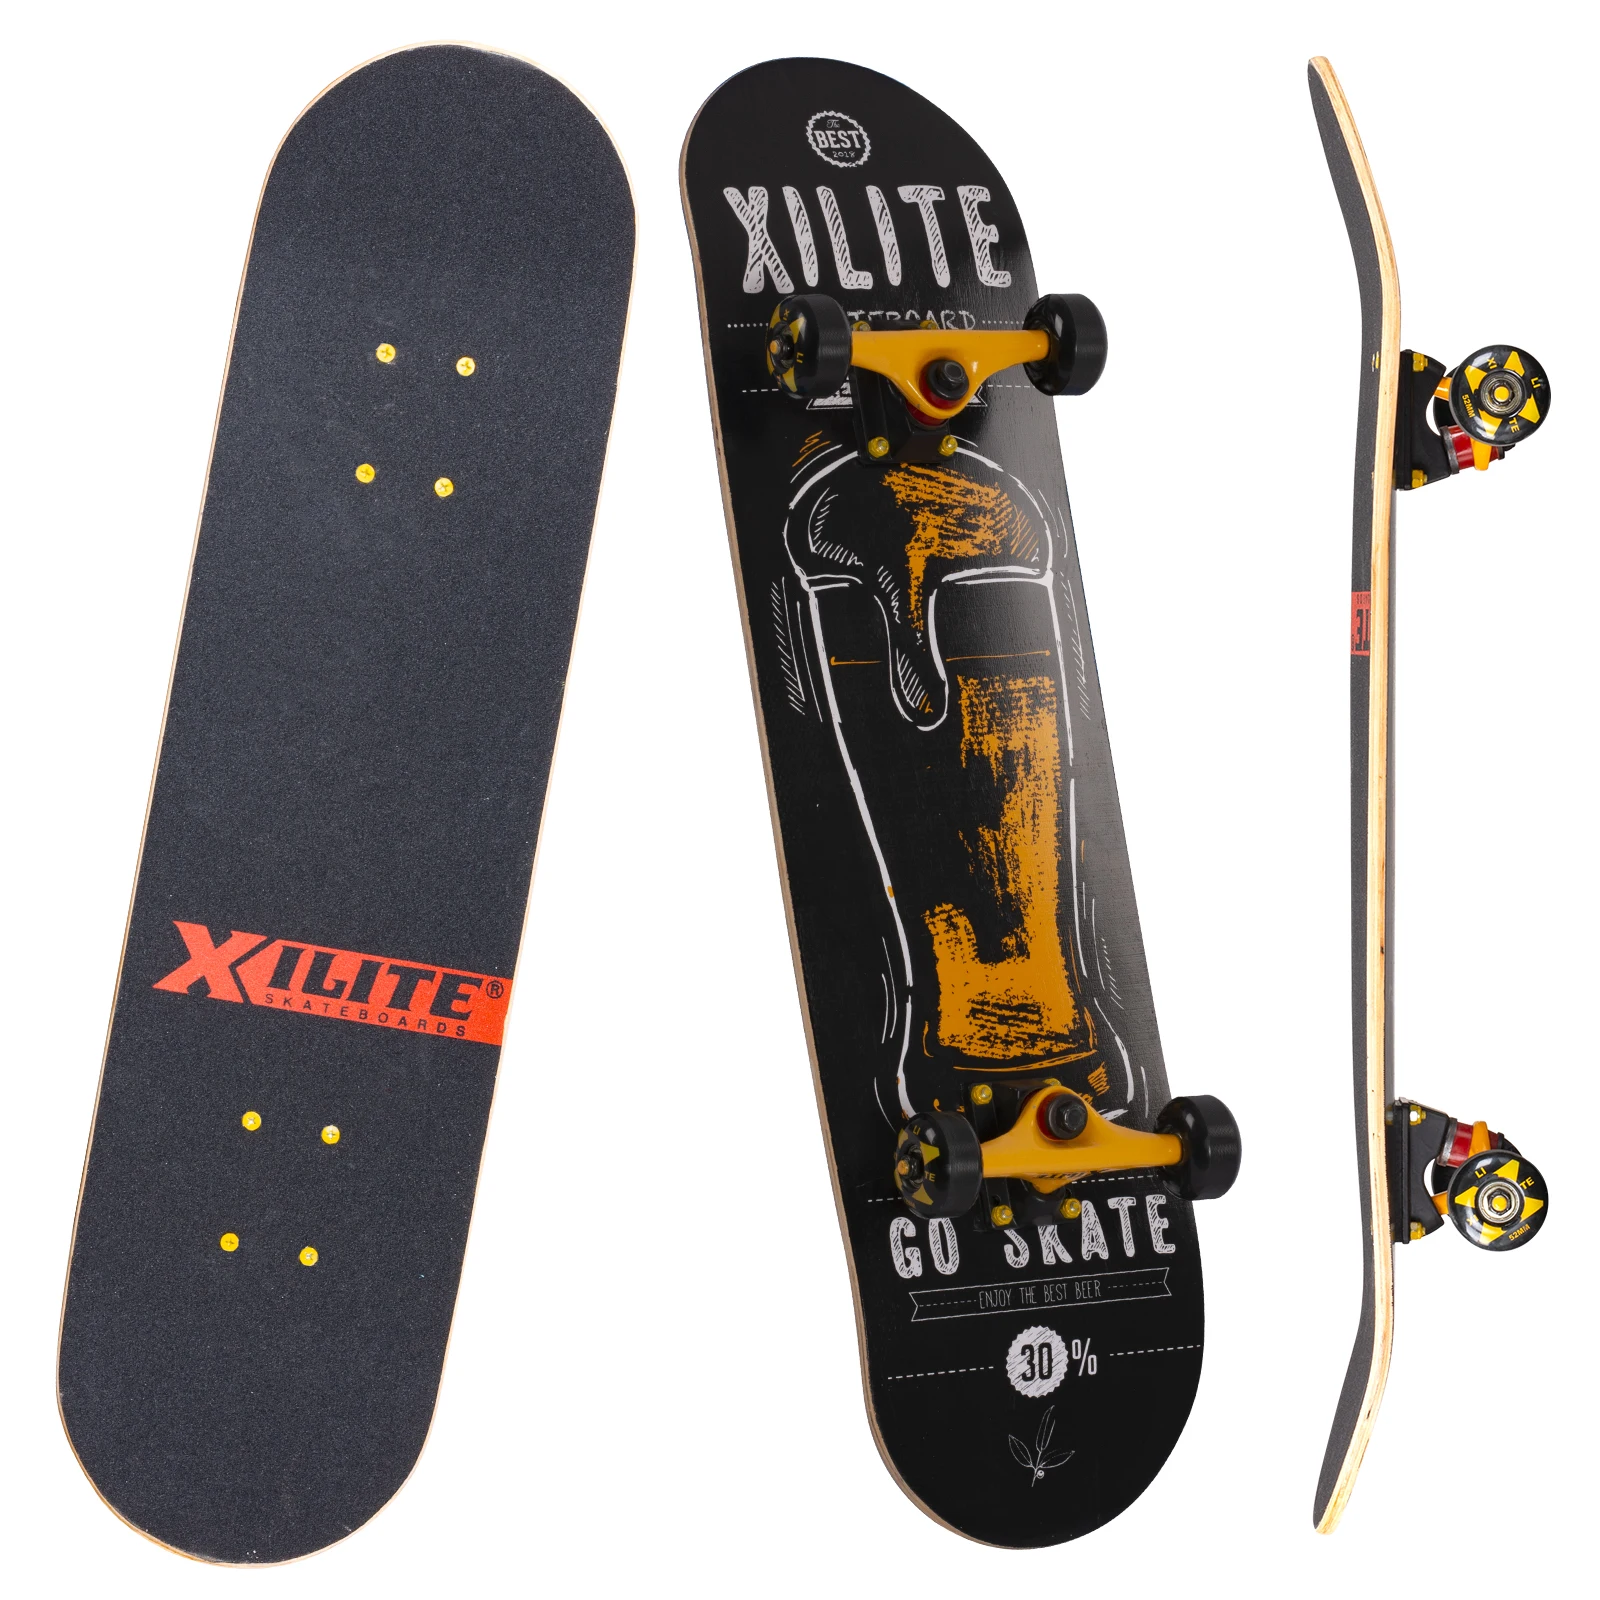 

Professional Complete Skateboard Deck Skateboard 7 Layer Maple Wood Skateboard Deck For Extreme Sports And Outdoors